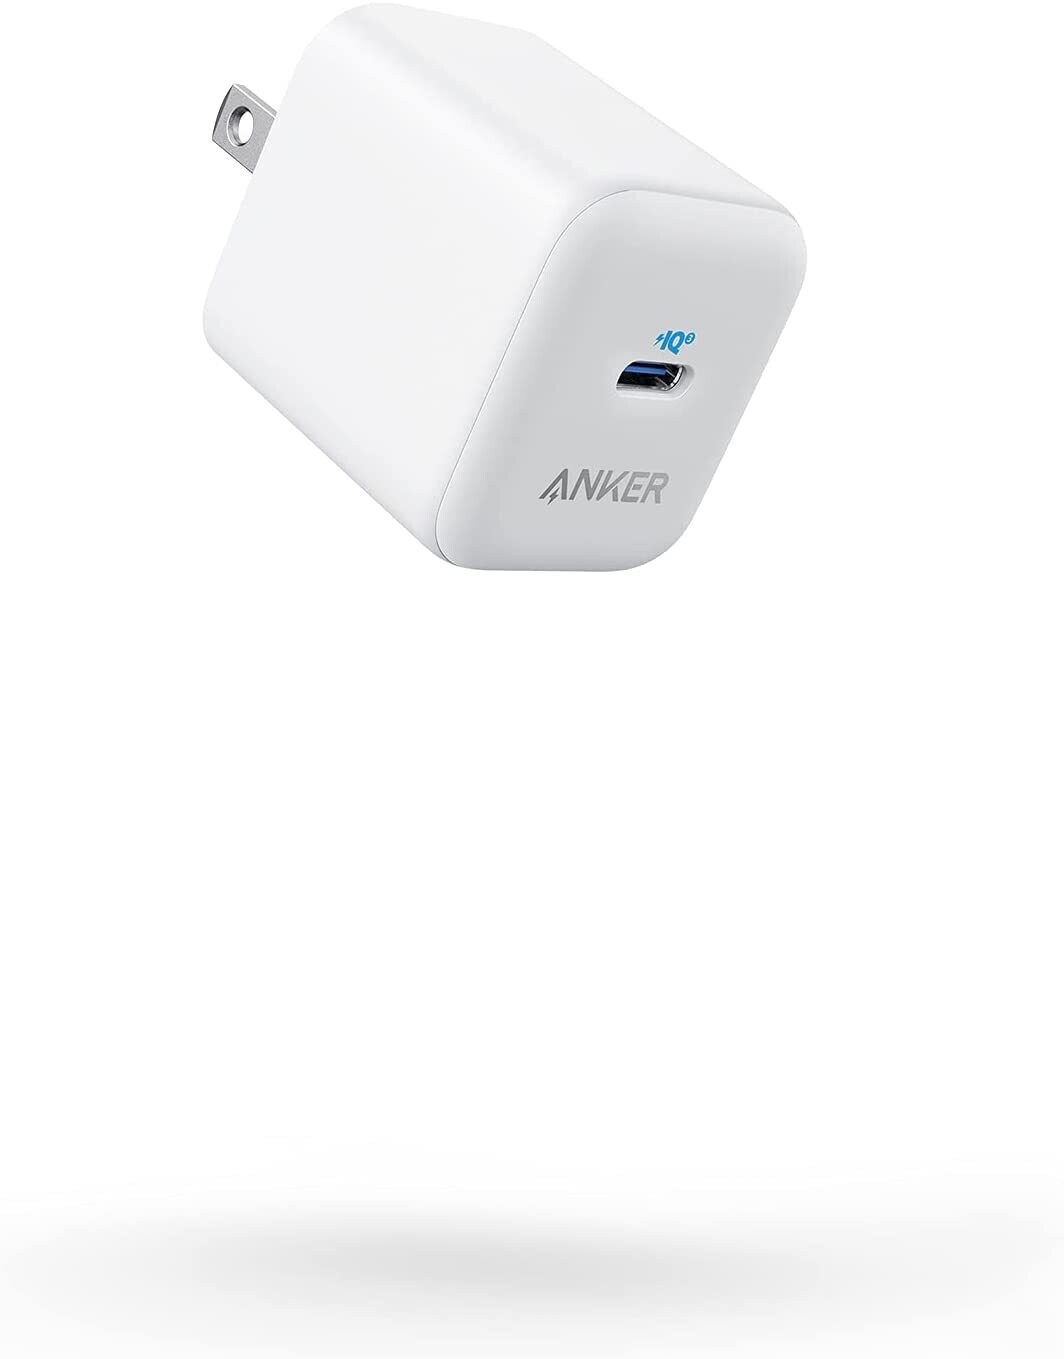 USB C Charger, Anker 20W PIQ 3.0 Fast Charger, PowerPort III Charger for iPhone 13/13 Mini/13 Pro/13 Pro Max/12/11, iPad/iPad Mini, MagSafe, and More